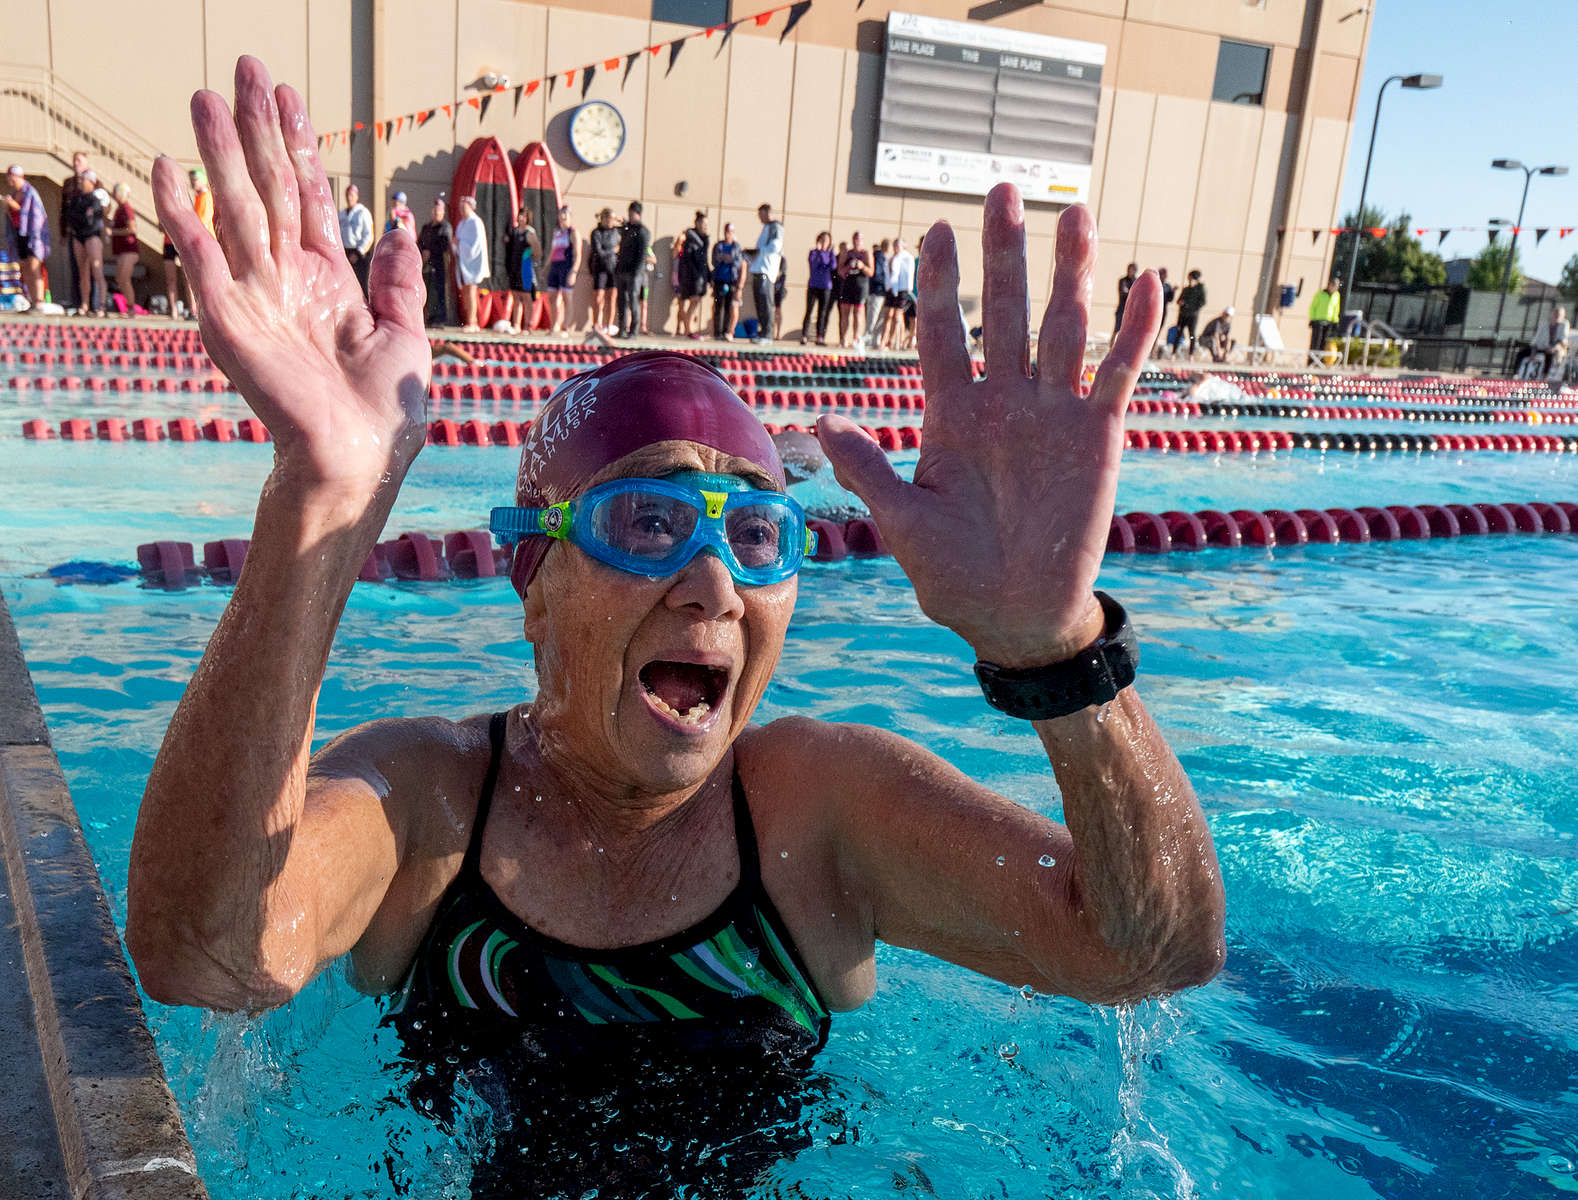 Senior athlete Flora Wong aged ninety one celebrates after completing the swim portion of the the Triathlon relay during the Huntsman World Senior Games on October 12, 2019 in St. George, Utah. 